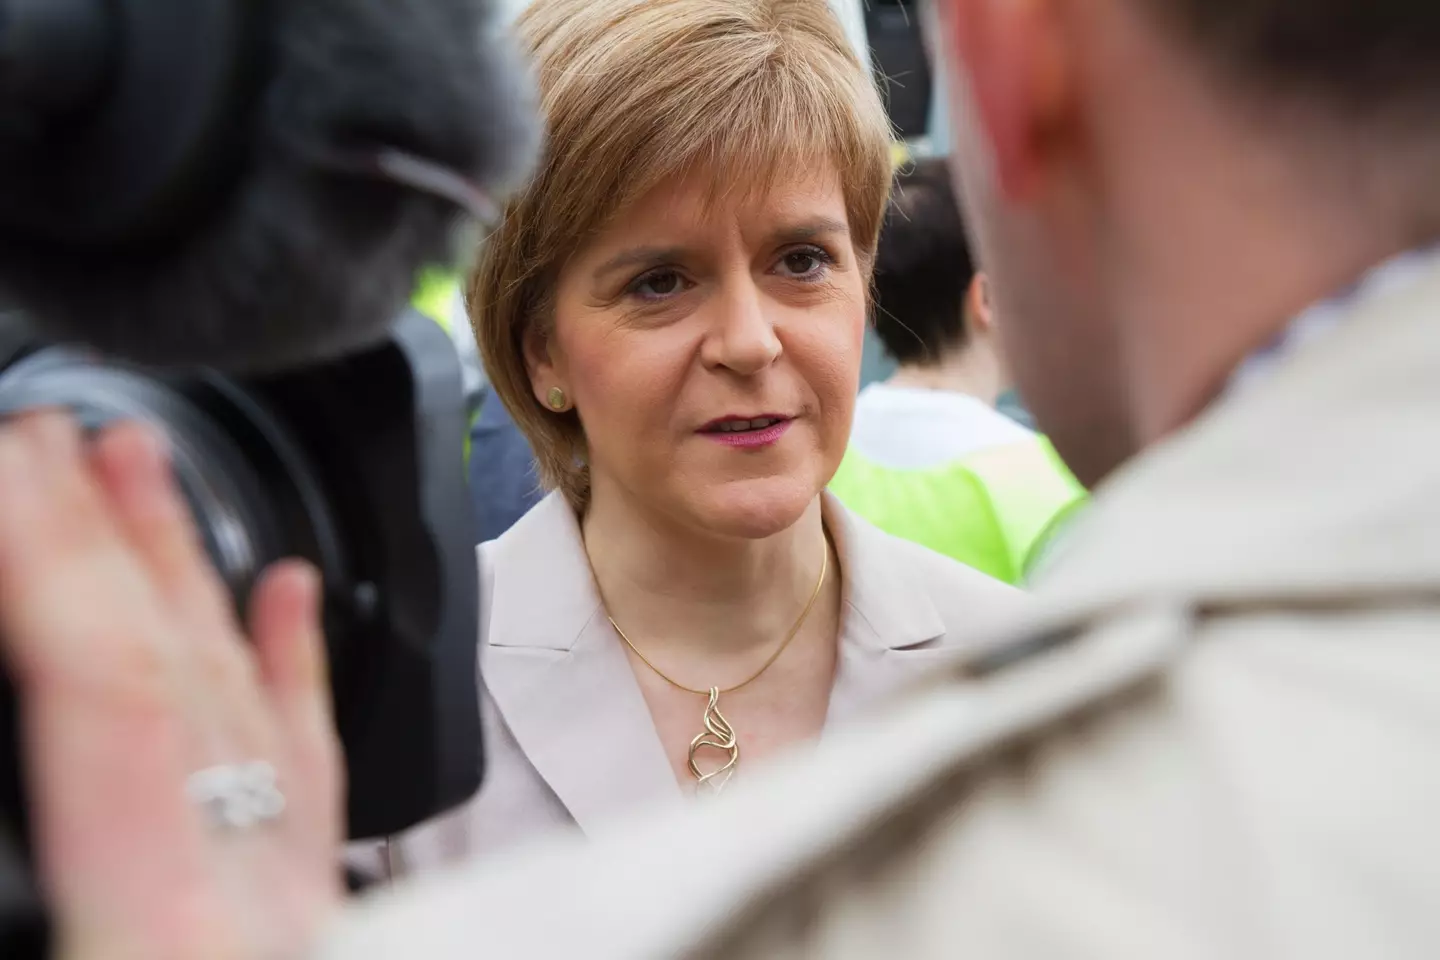 Scotland's first minister wants to freeze public and private rents.